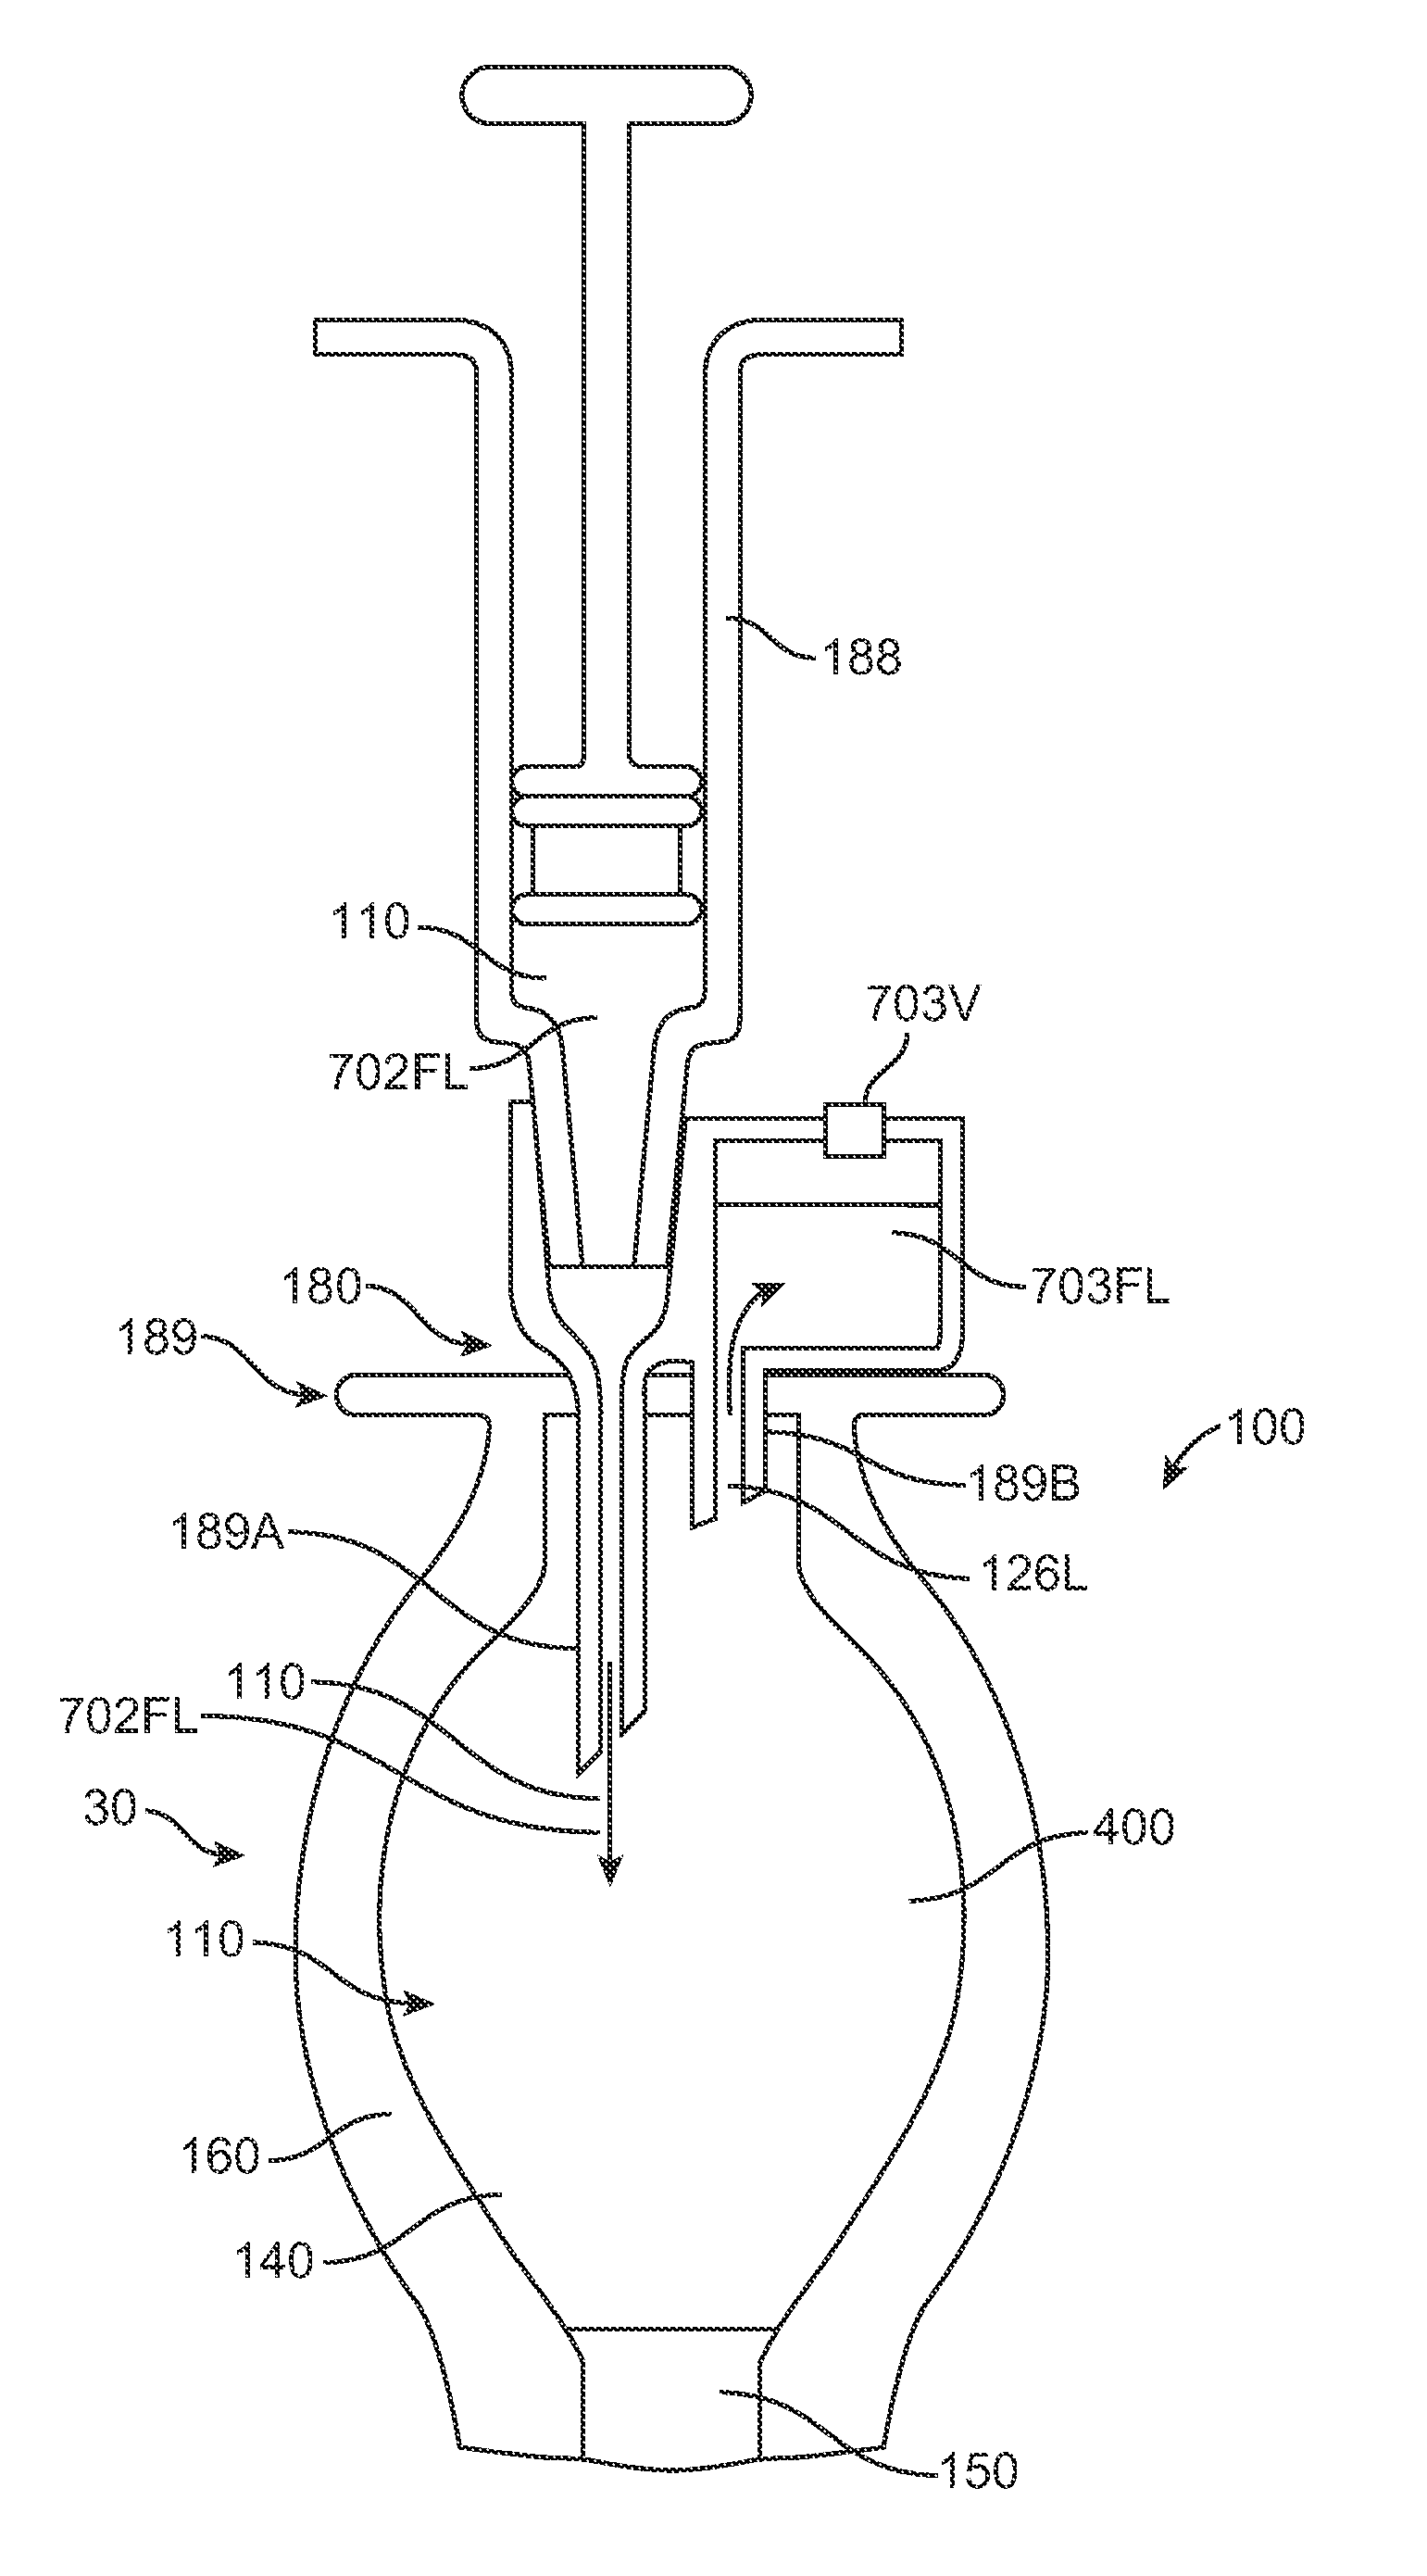 Injector apparatus and method for drug delivery